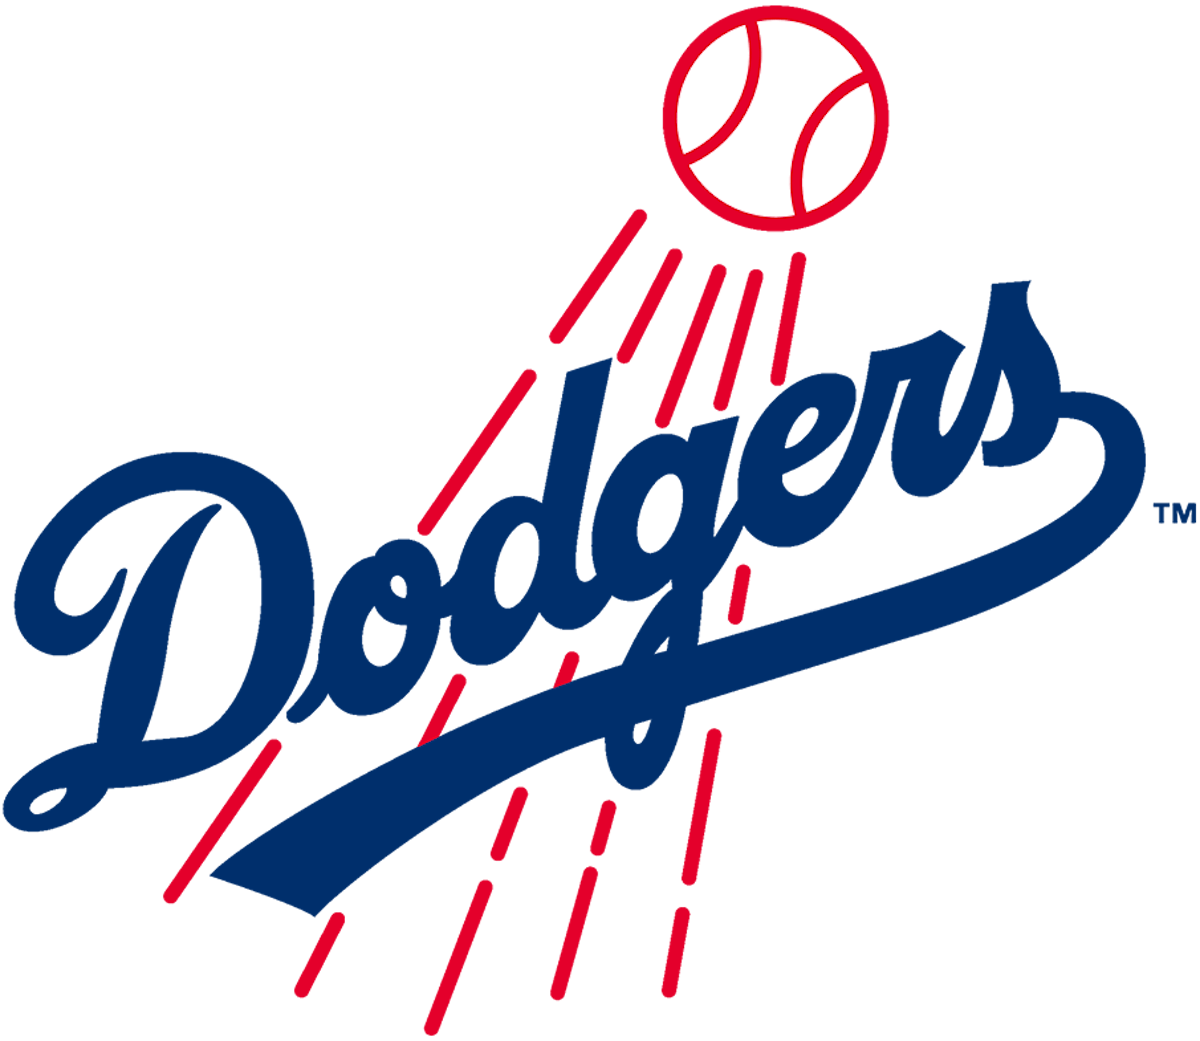 Lawsuit Dodgers Players Pefer 'White, Young, Thin' Flight Attendants